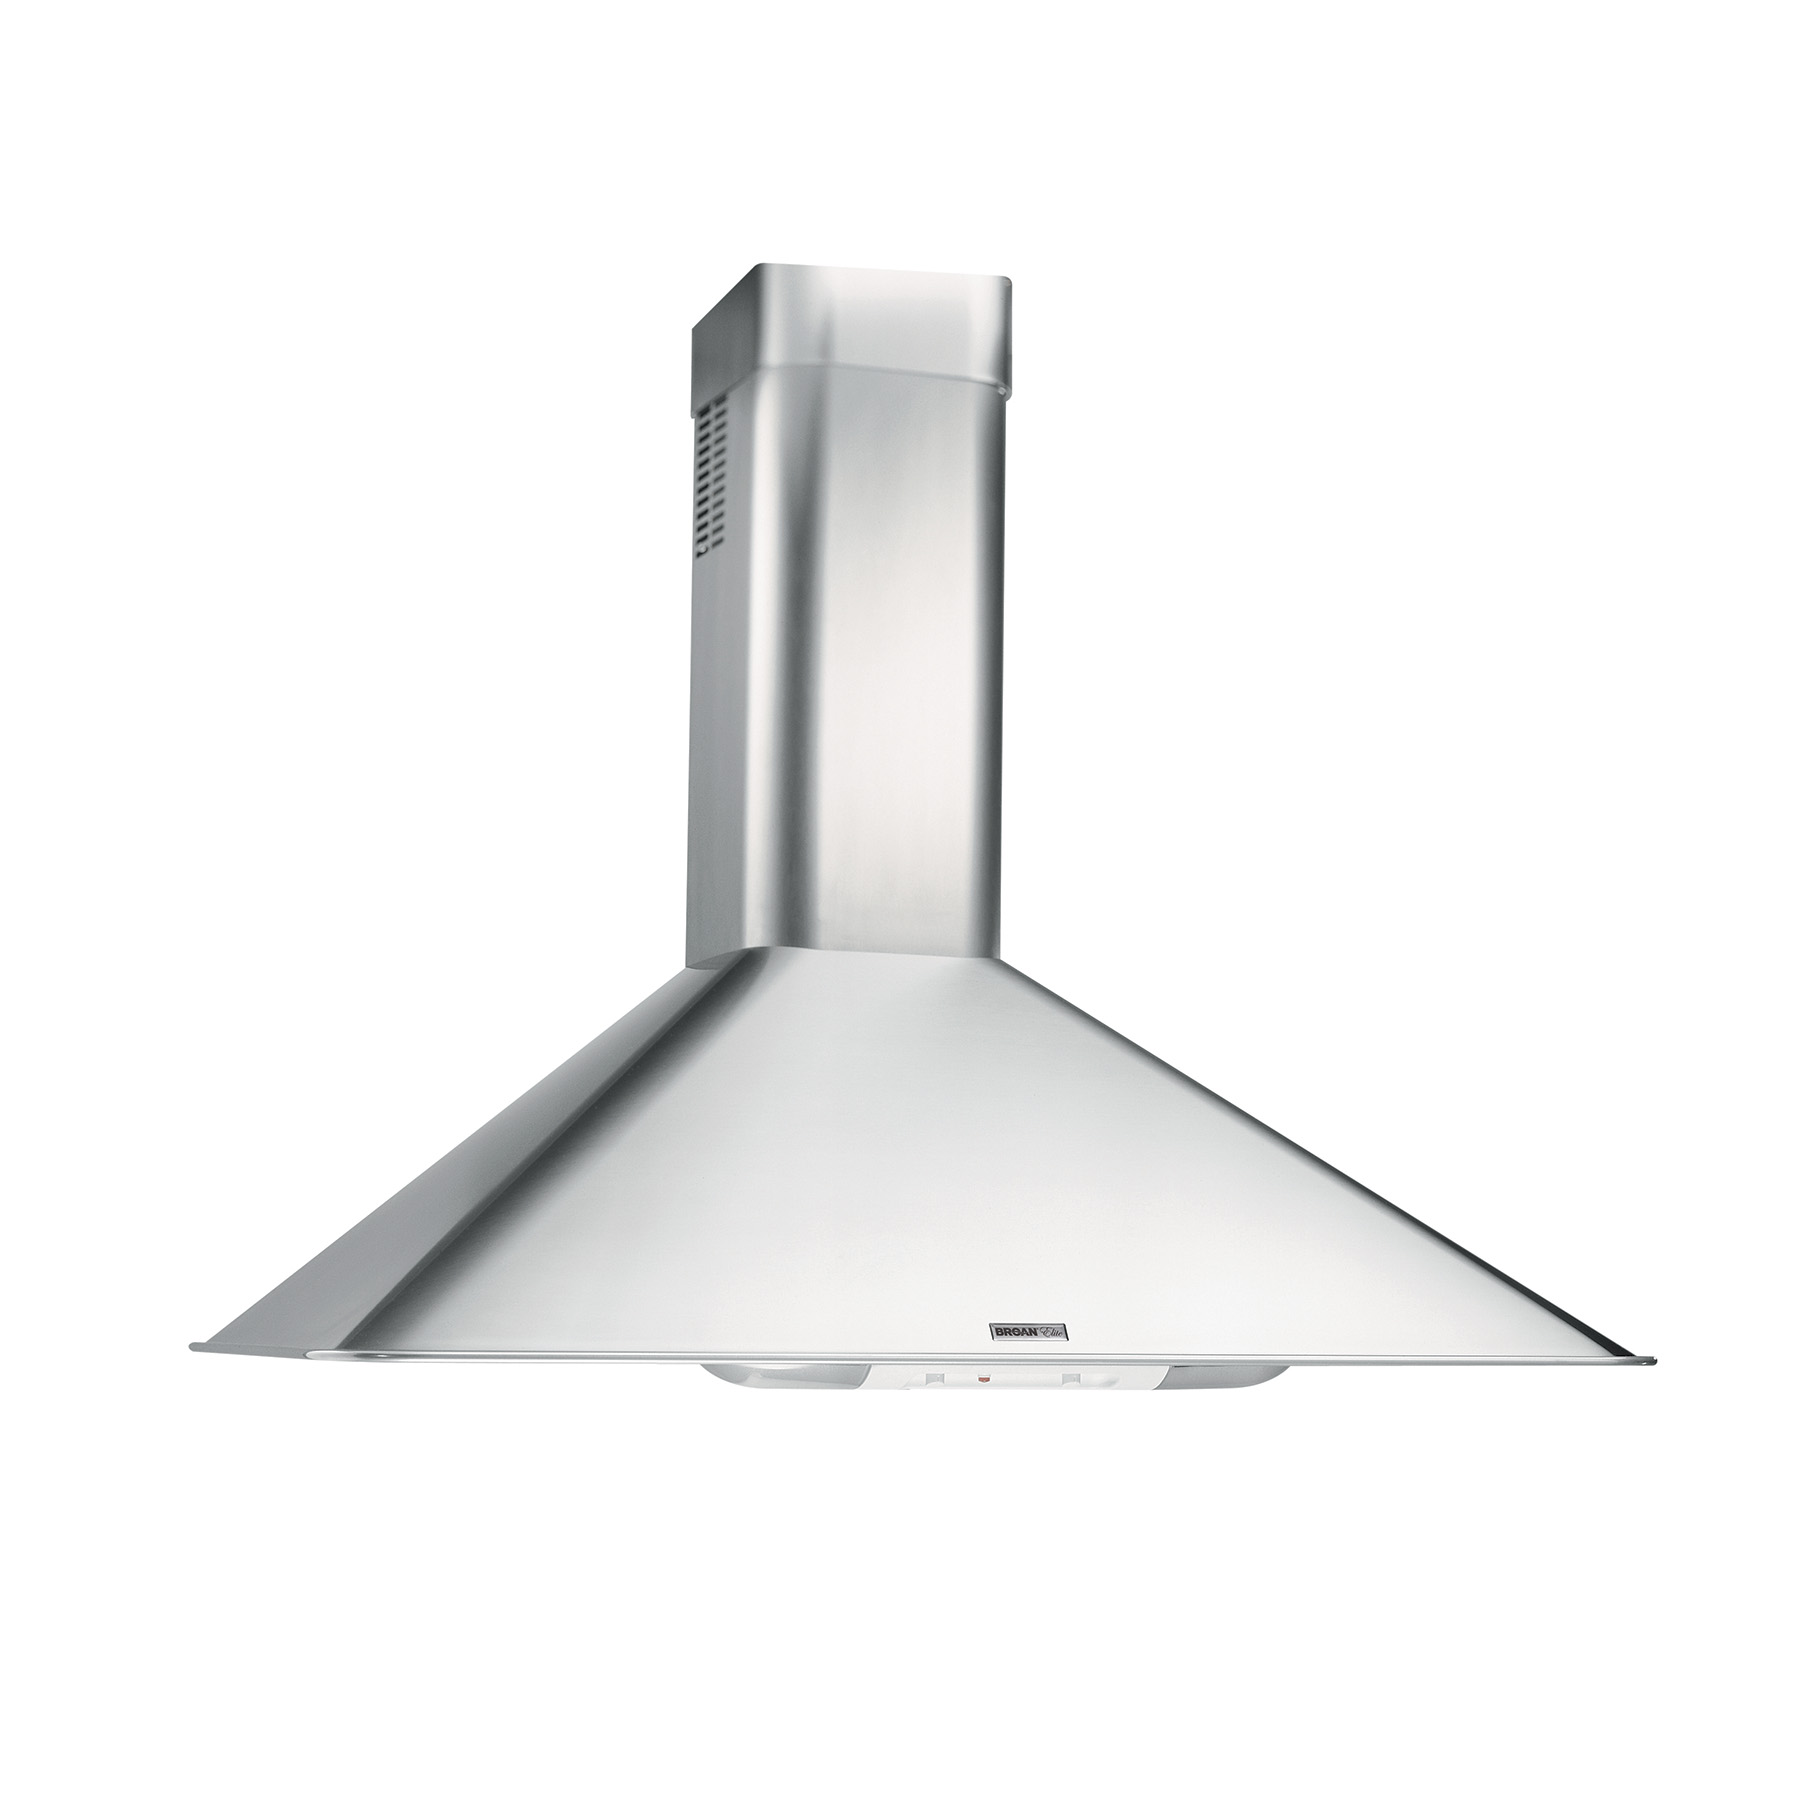 DISCONTINUED: Broan® 290 CFM, 35-7/16-Inch Wall-Mounted Chimney Hood in Stainless Steel